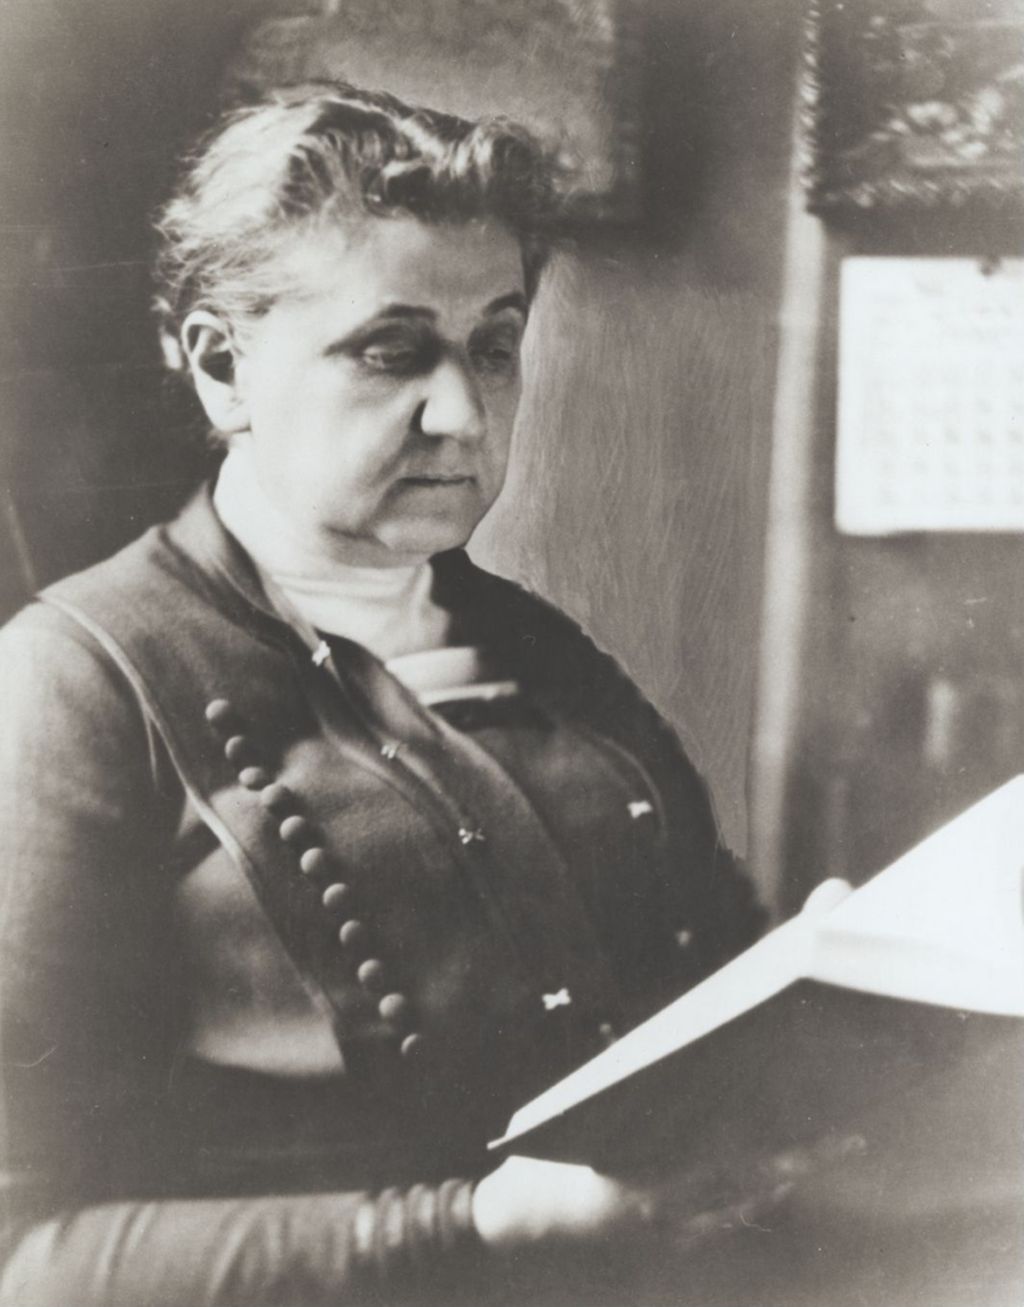 Miniature of Jane Addams reading a book